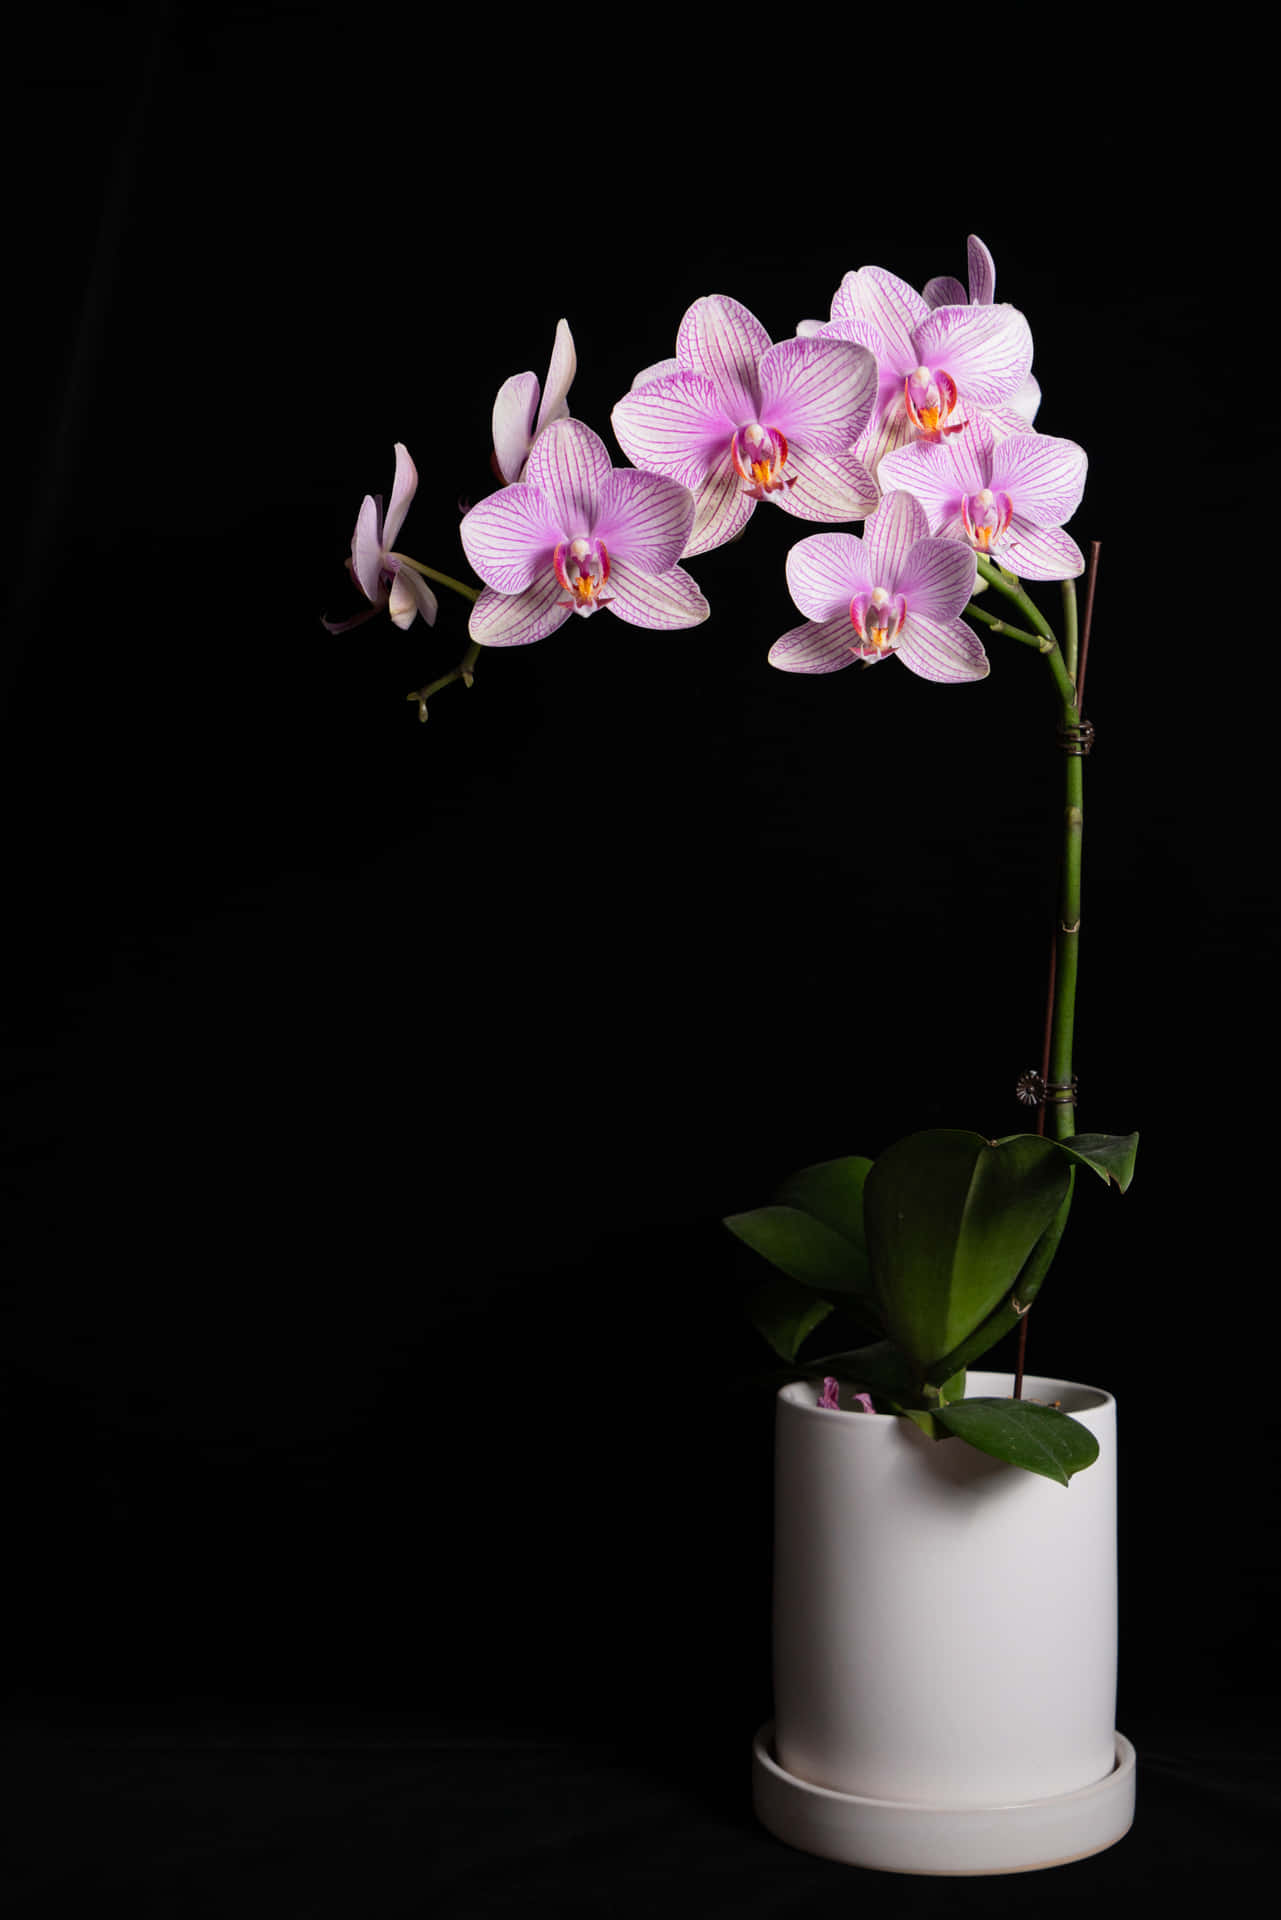 Captivating Orchid in Full Bloom